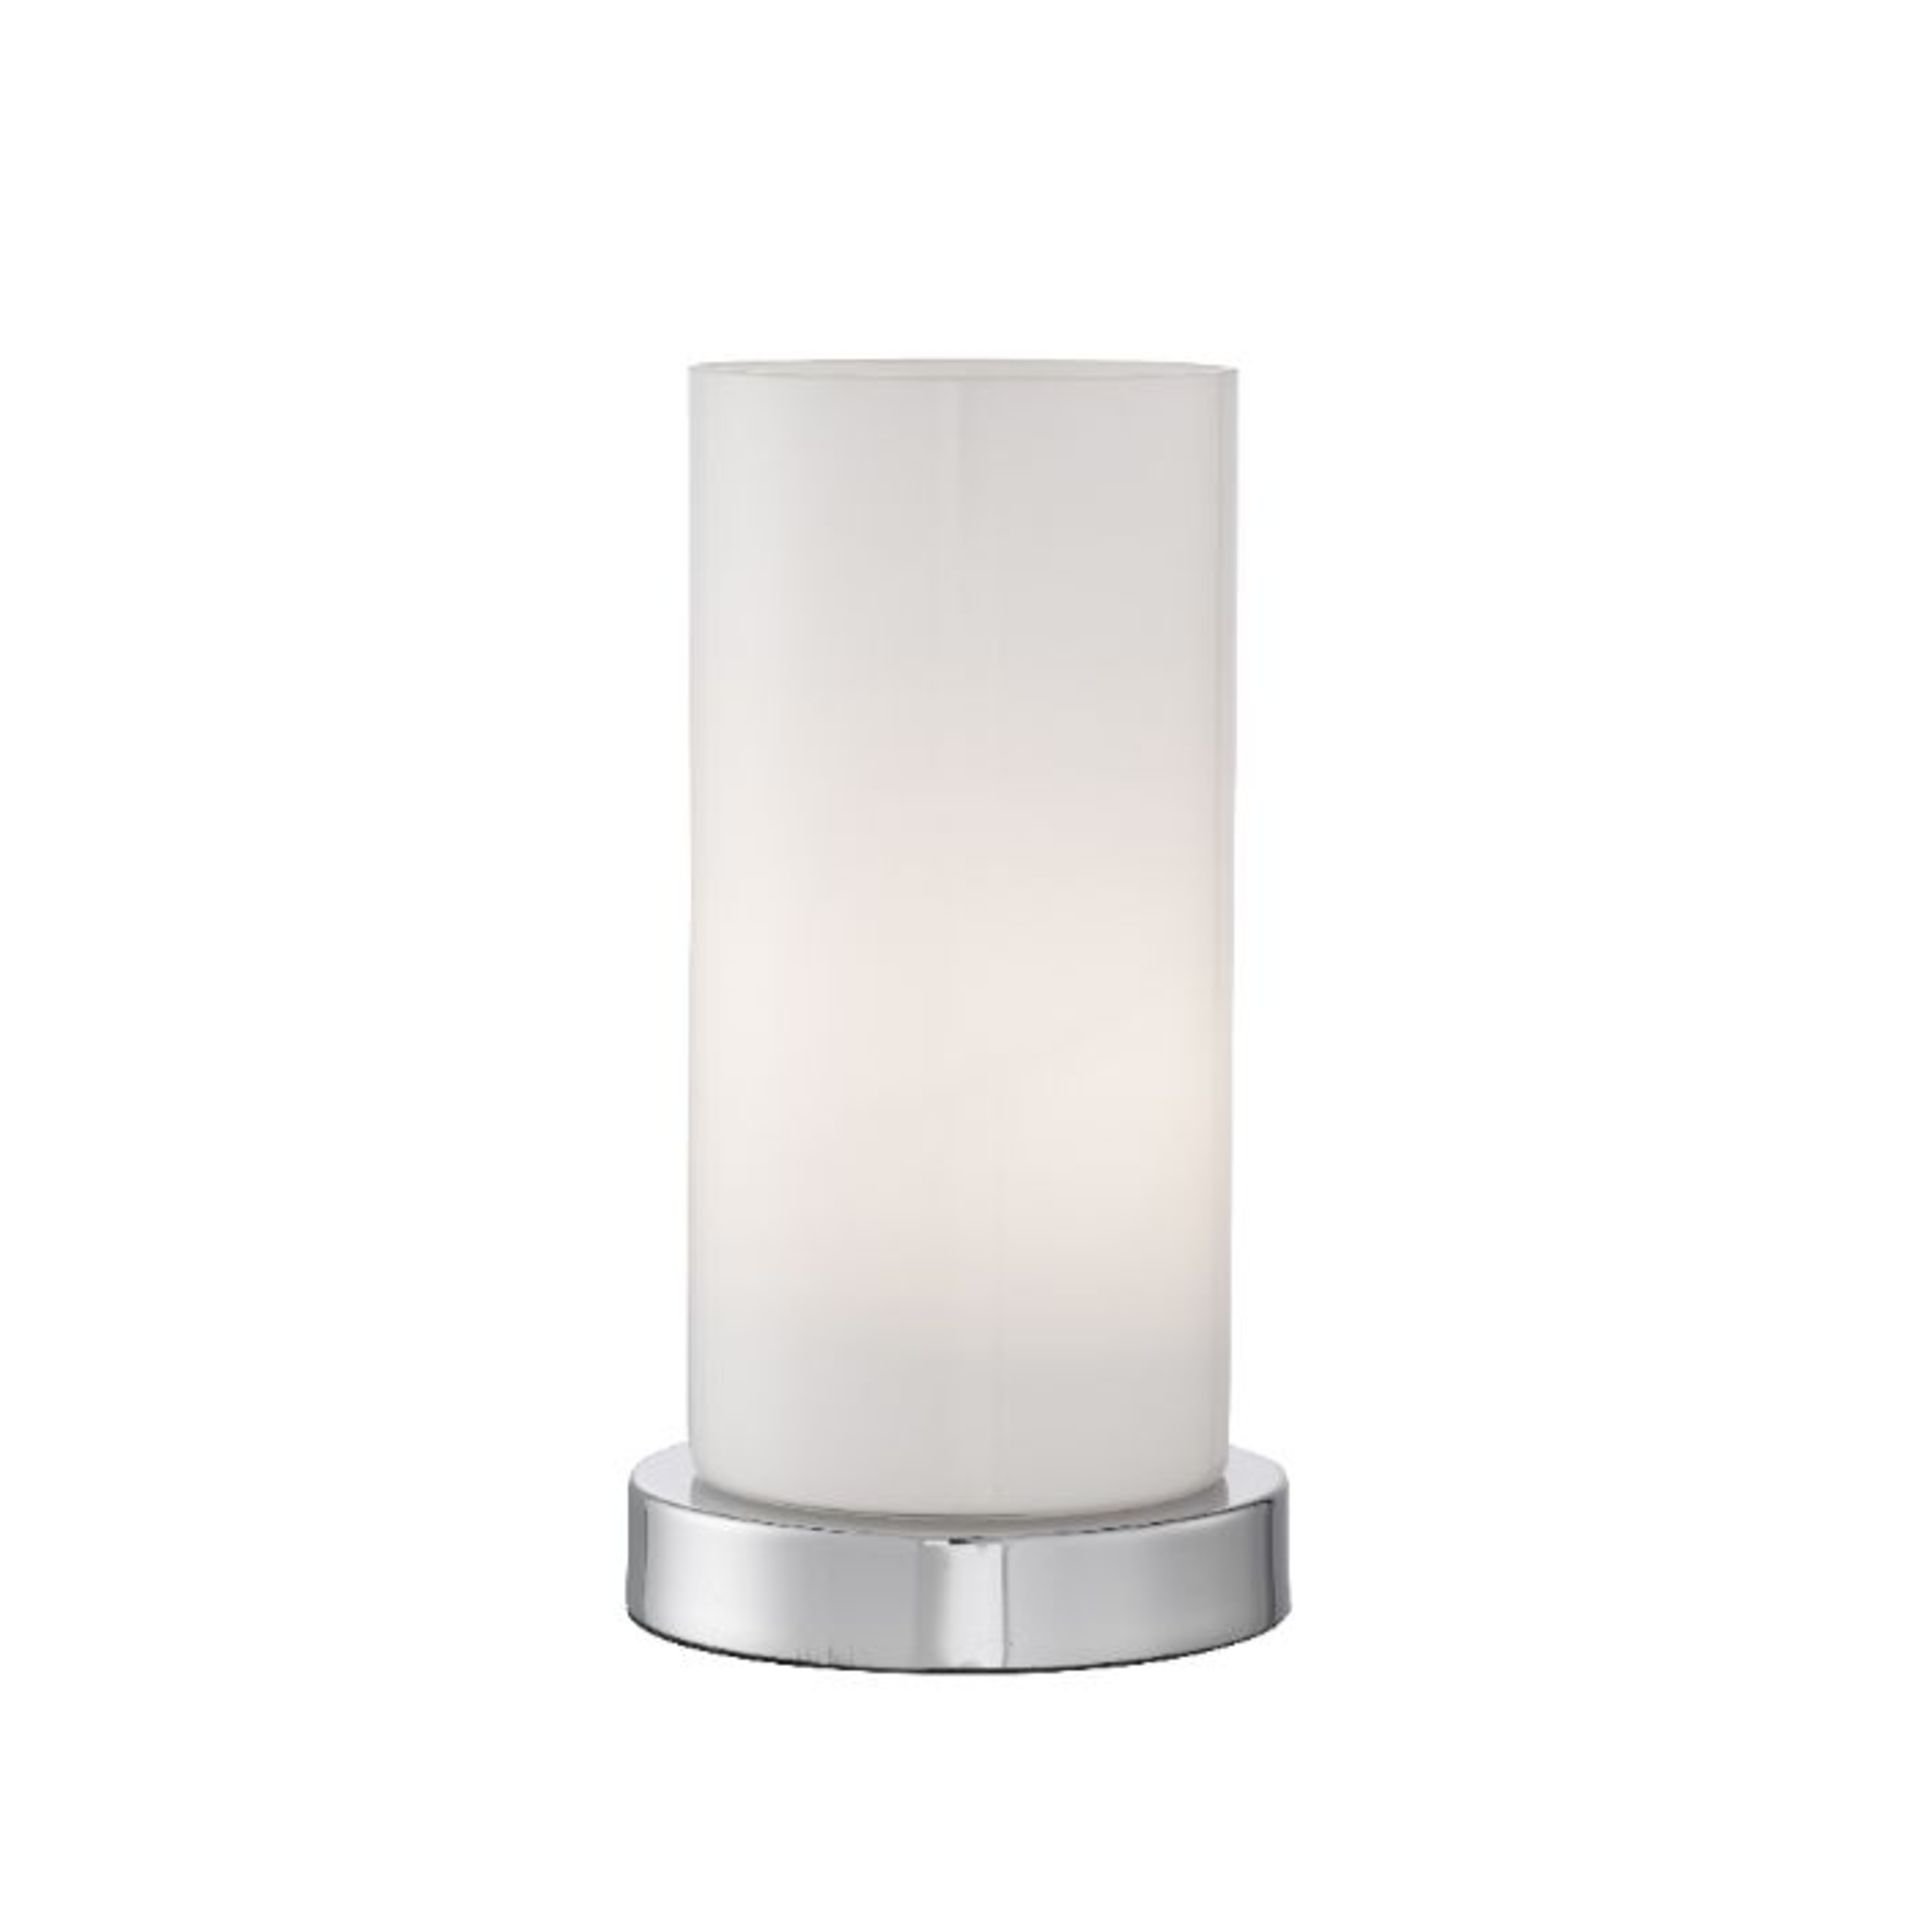 BRAND NEW TOUCH TABLE LAMP IN CHROME WITH WHITE CYLINDER SHADE 19.5CM HIGH, 60W - Touch table lamp